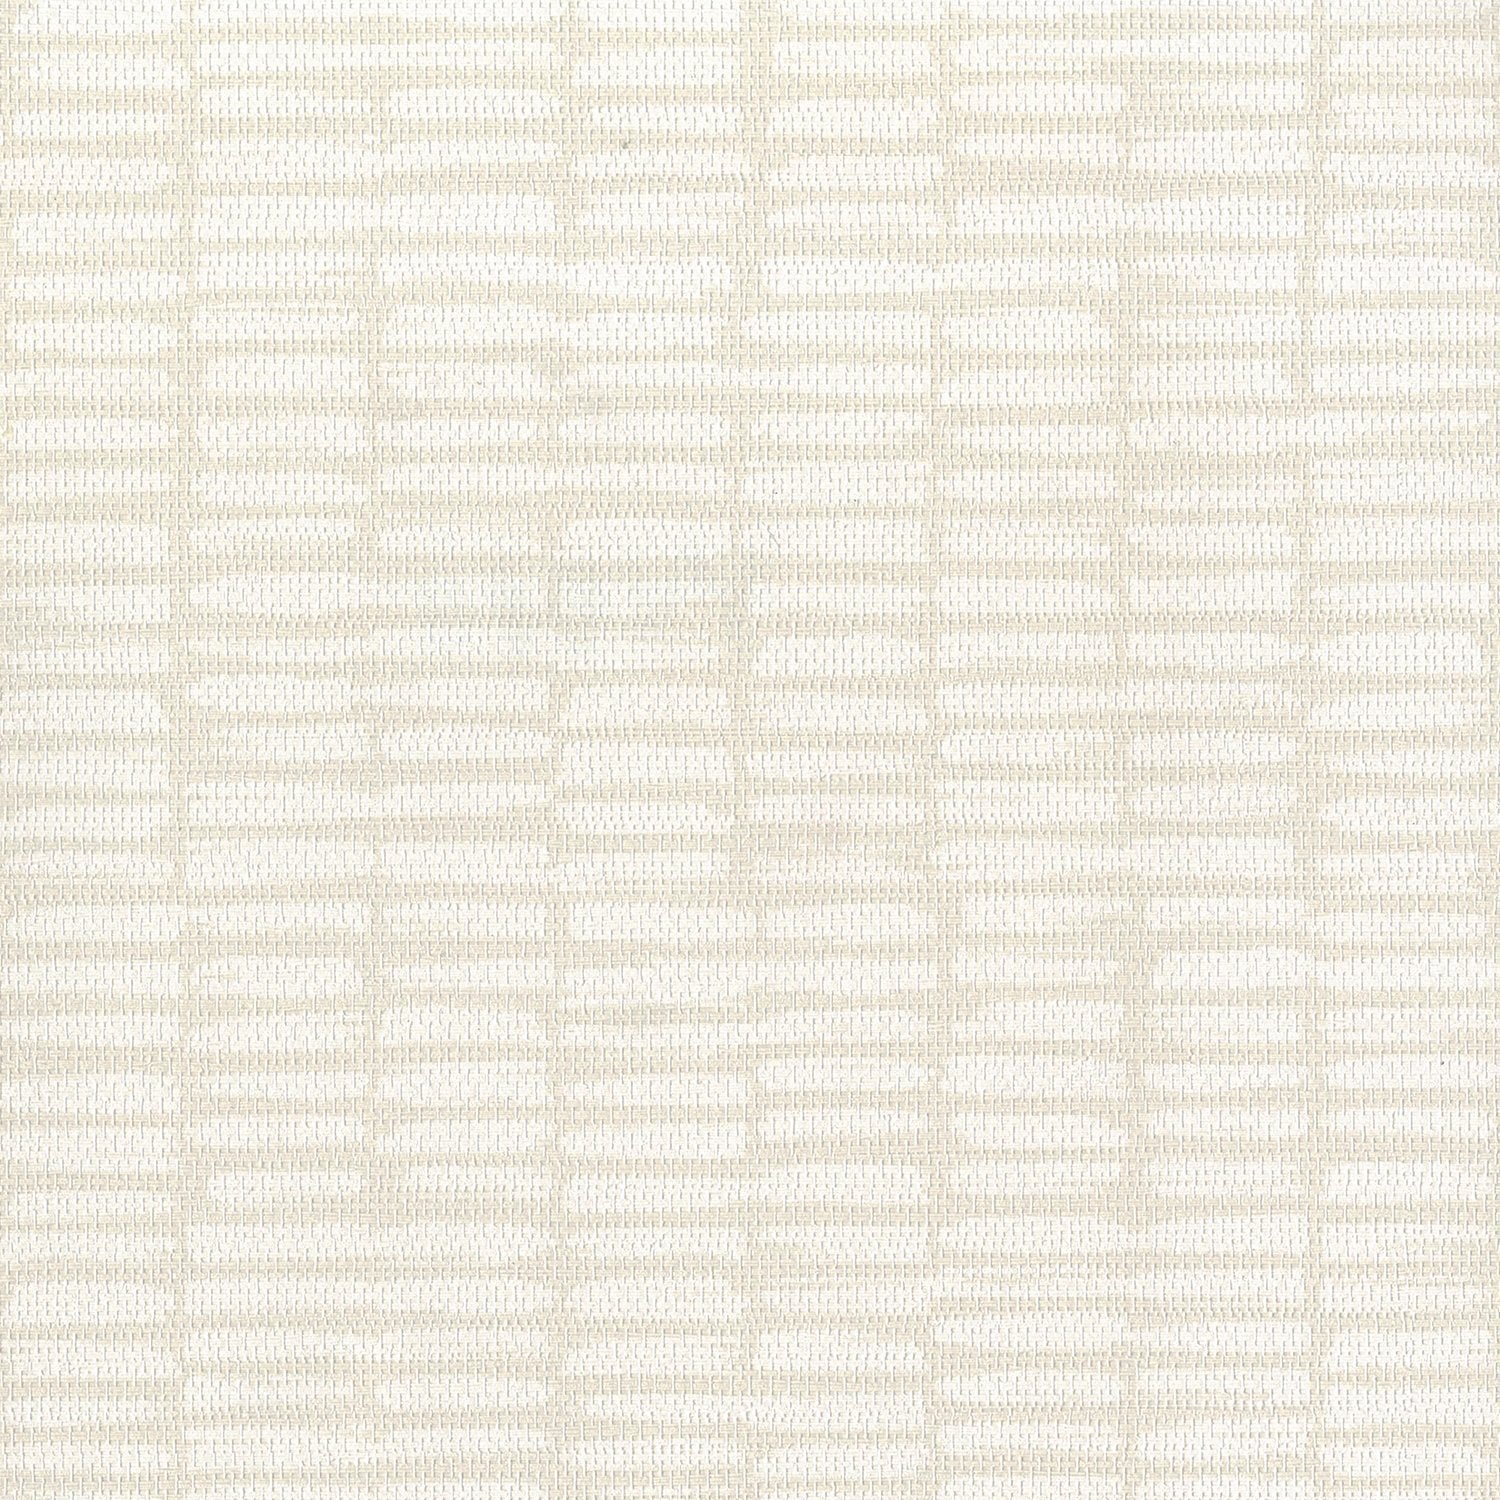 Dash-ing - Y48011 - Wallcovering - Vycon - Kube Contract